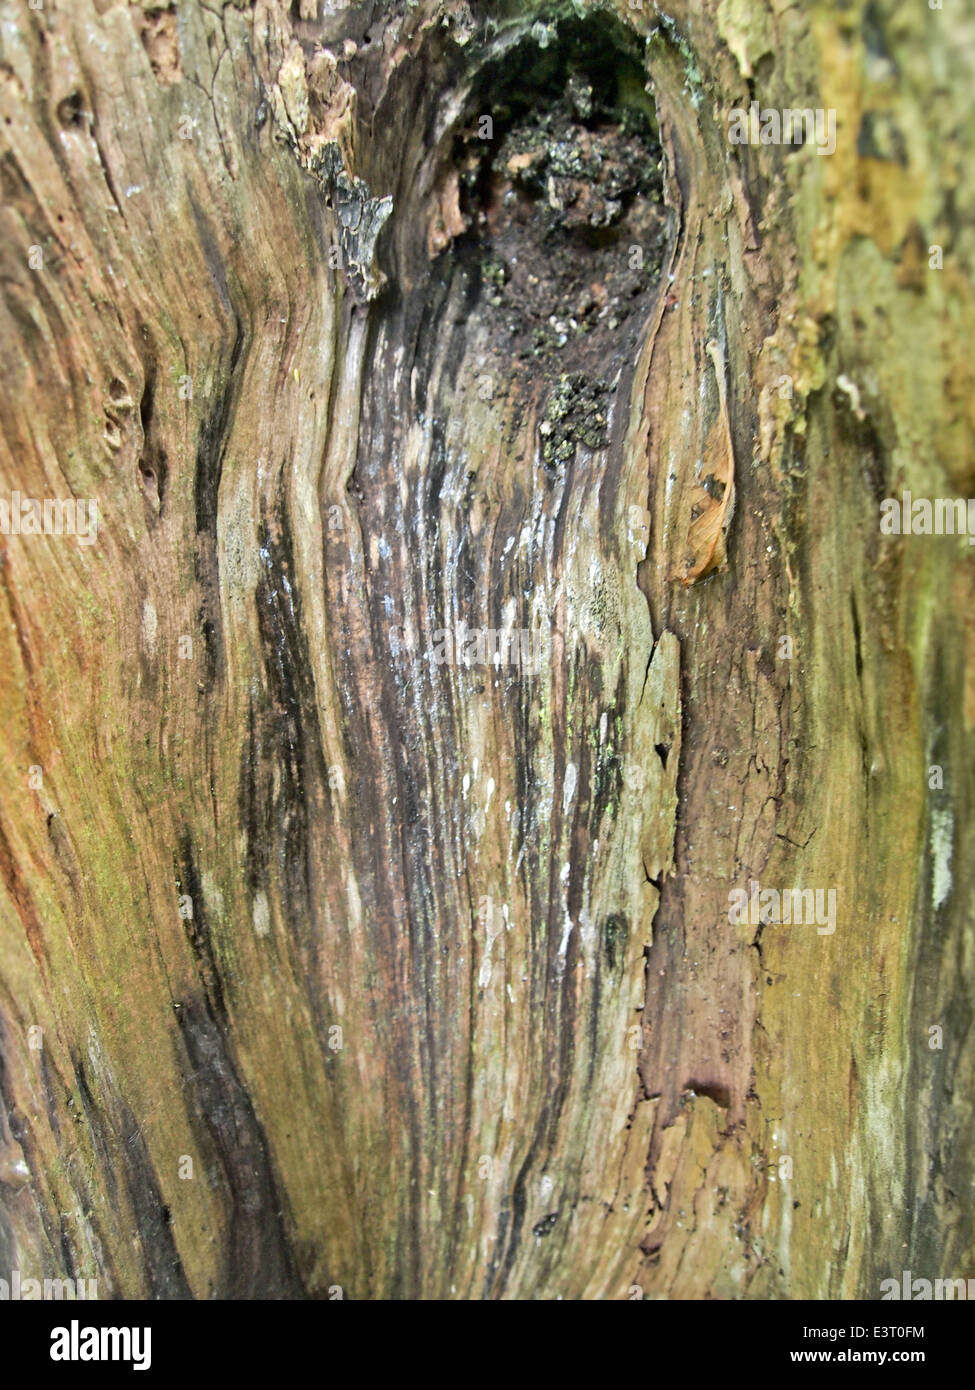 Rotted apple tree trunk Stock Photo